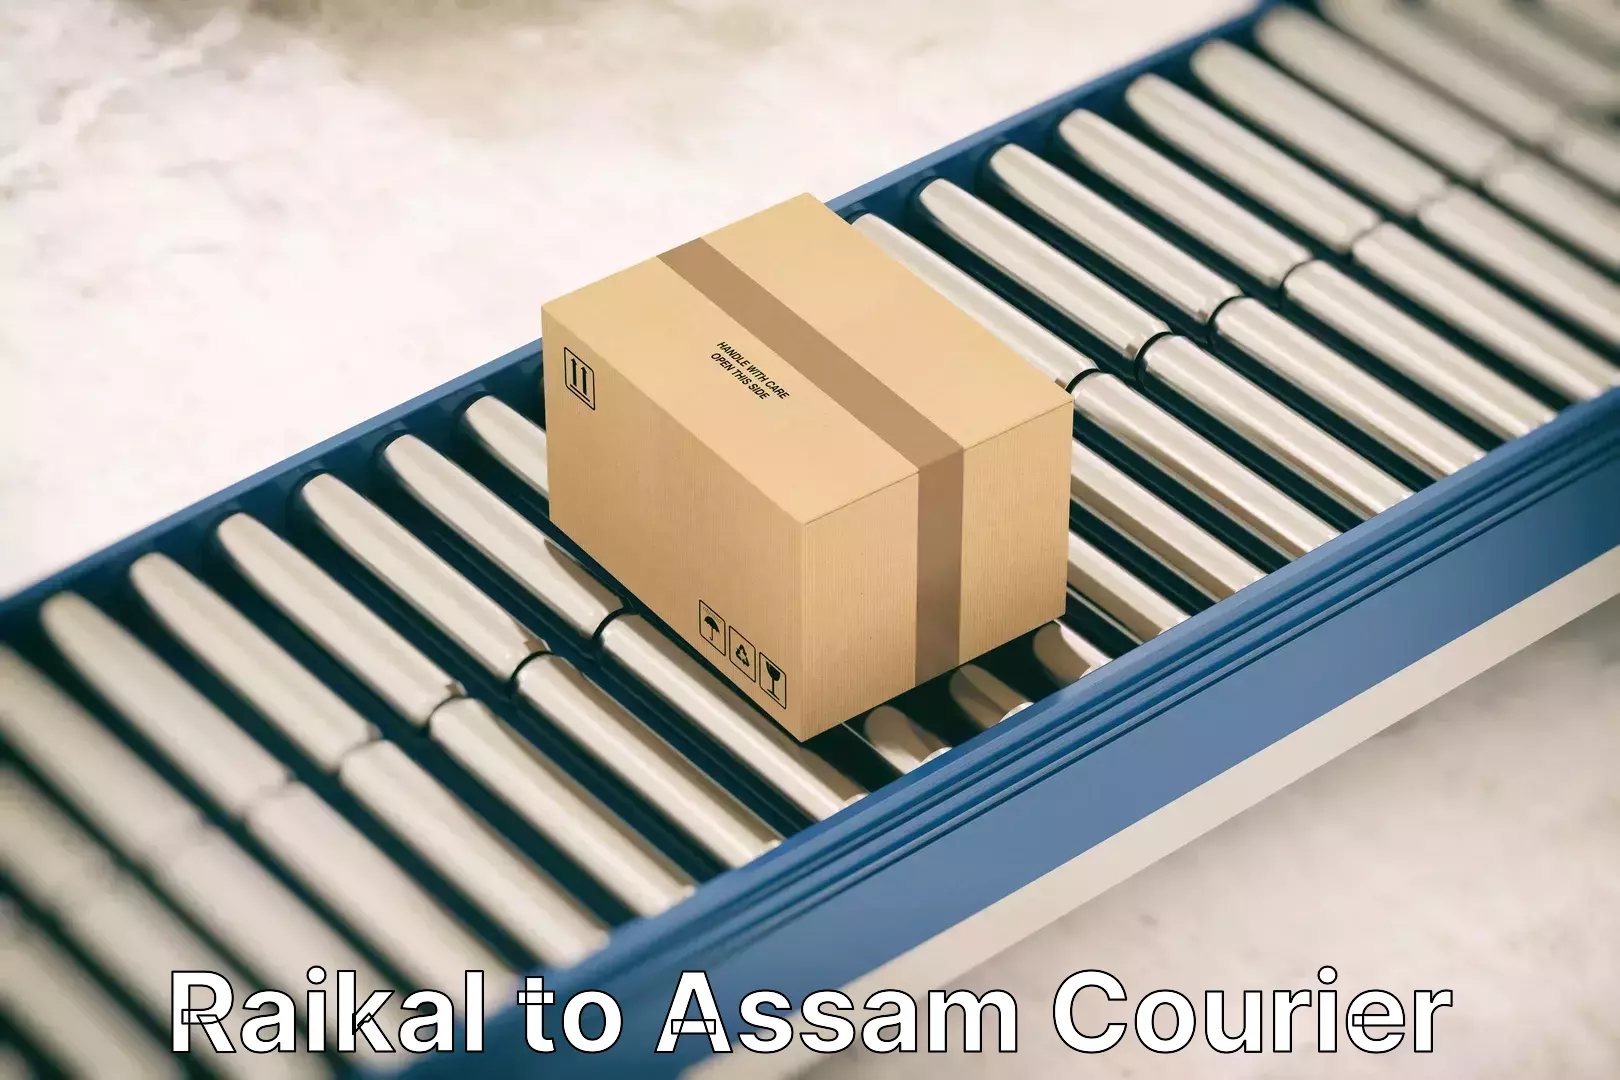 Professional movers and packers Raikal to Assam